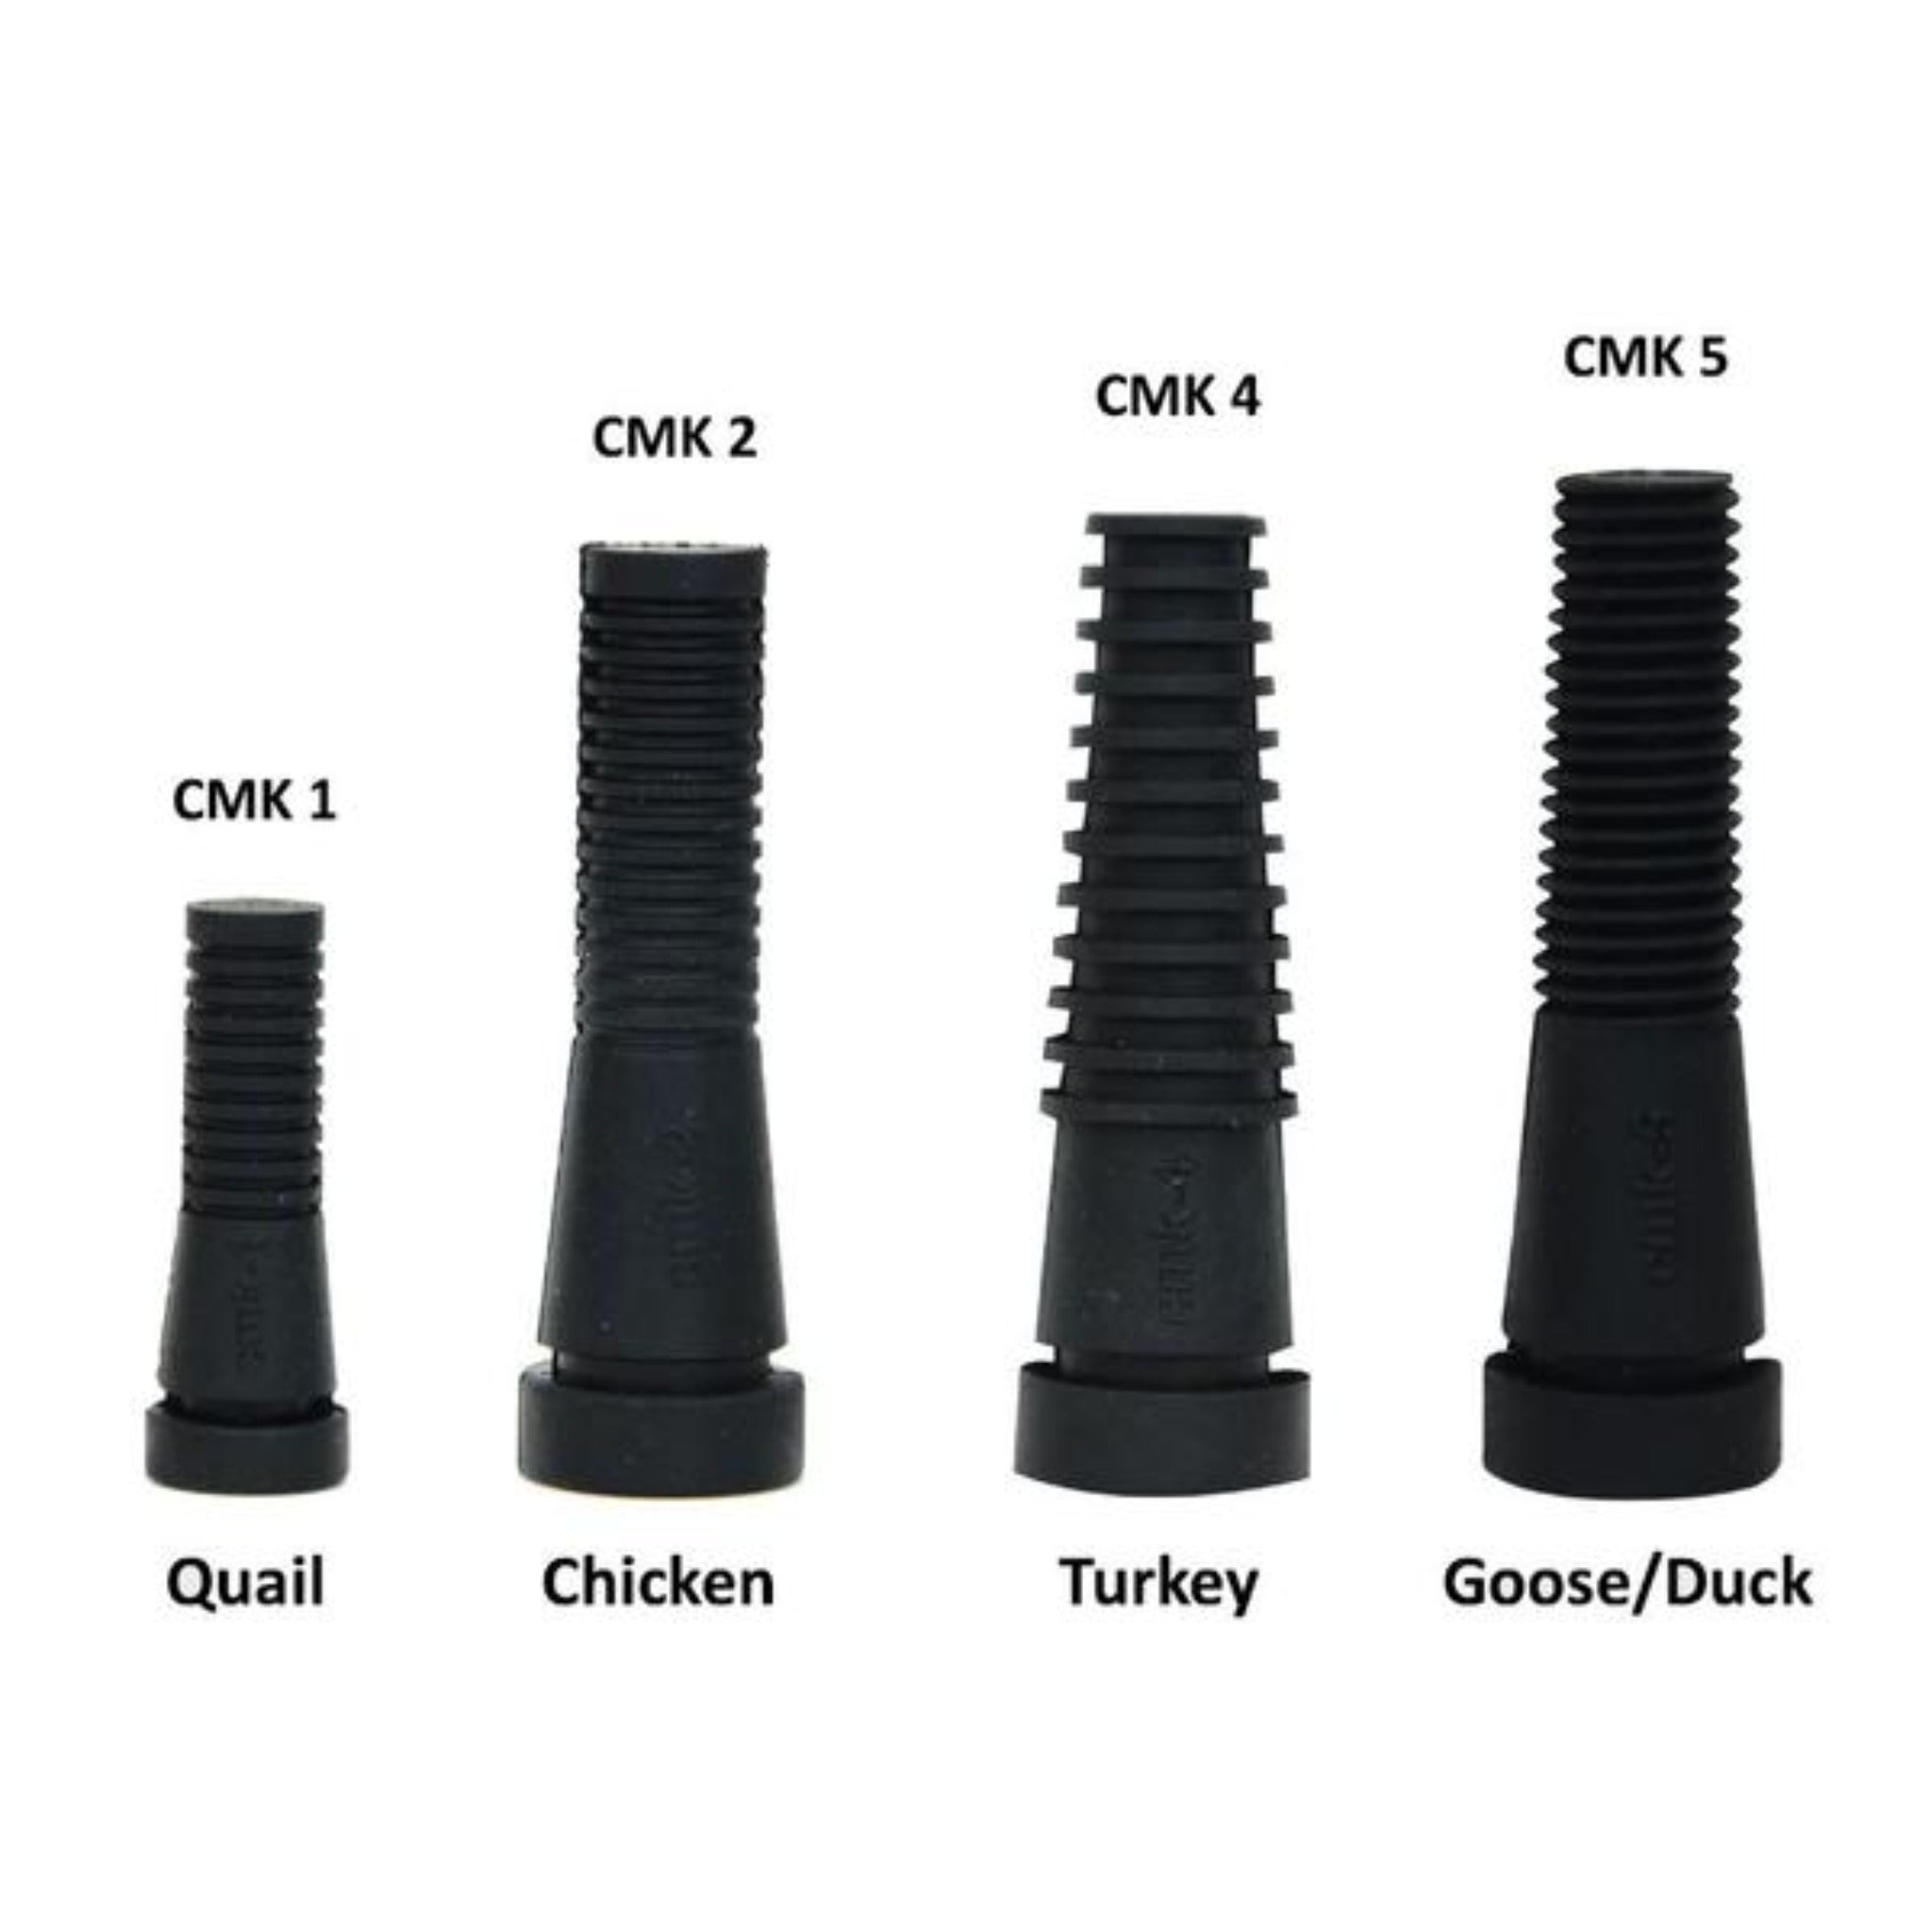 Hatching Time Cimuka. Image shows scale infographic to see difference in design and size for different types of poultry.